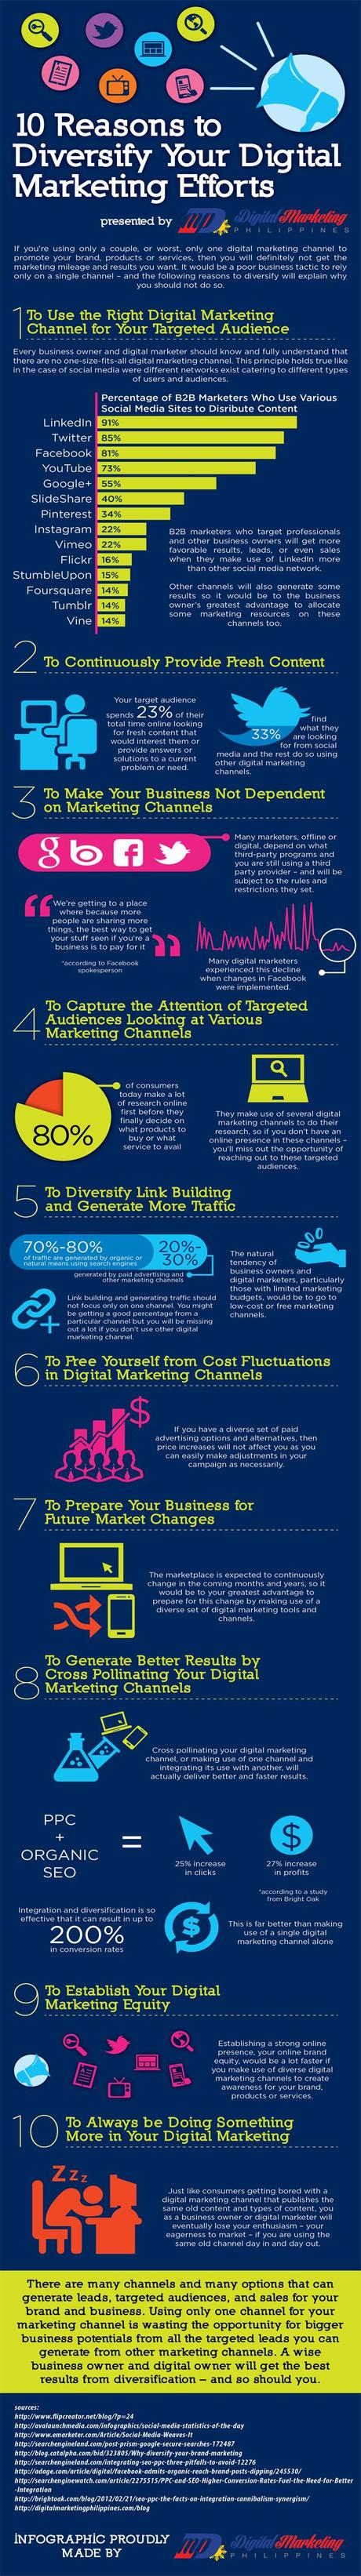 10 Reasons to Diversify Your Digital Marketing Efforts